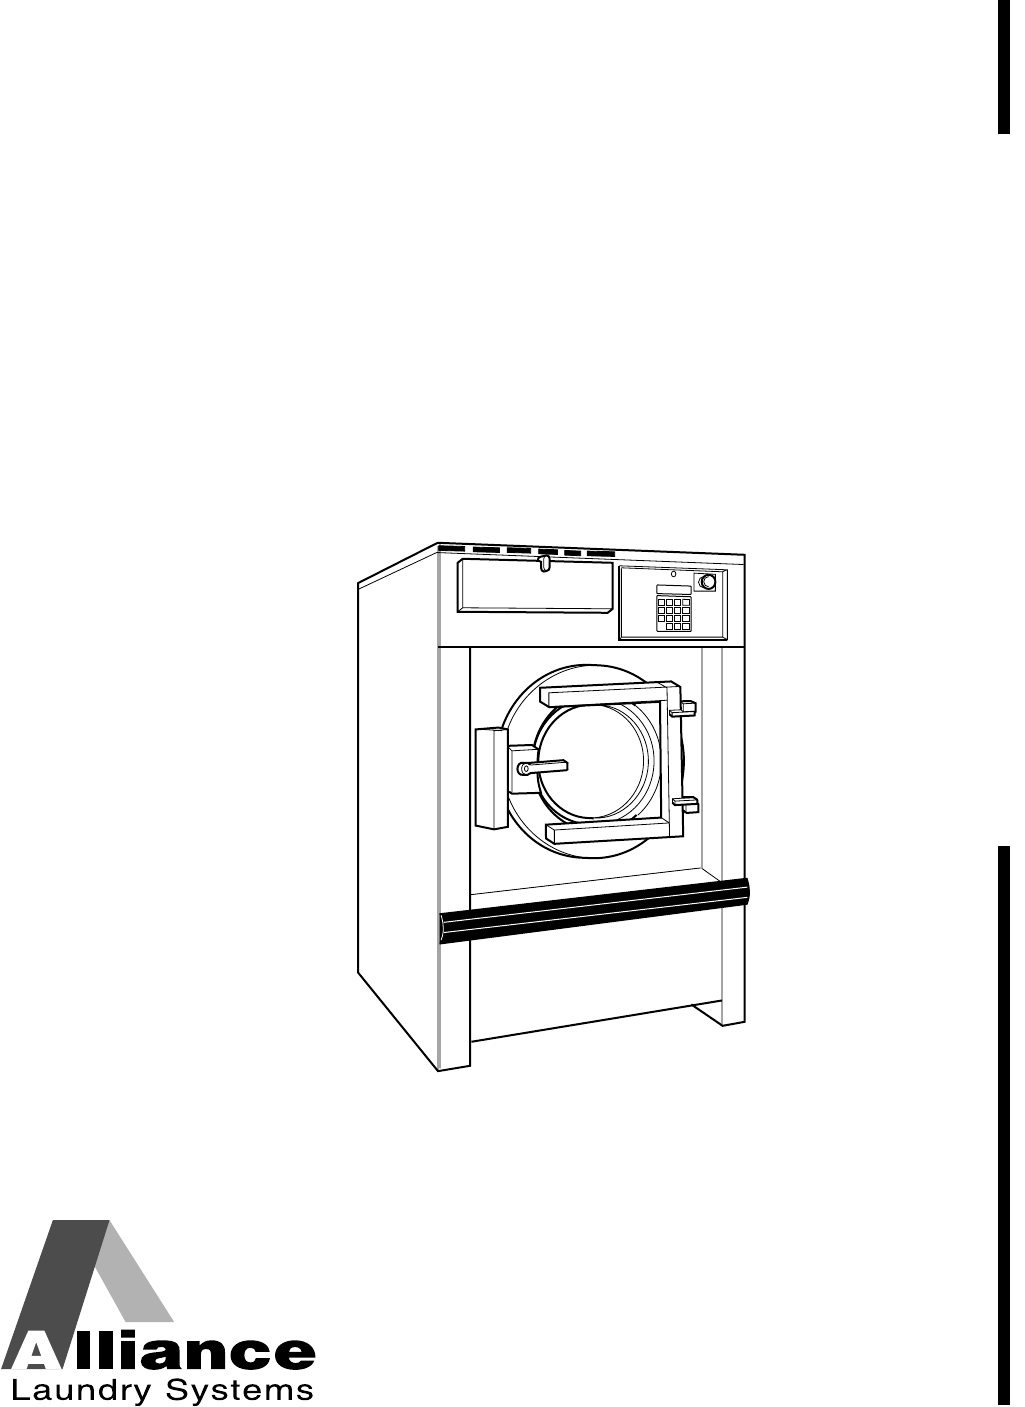 Alliance Laundry Systems UF85PV Washer User Manual